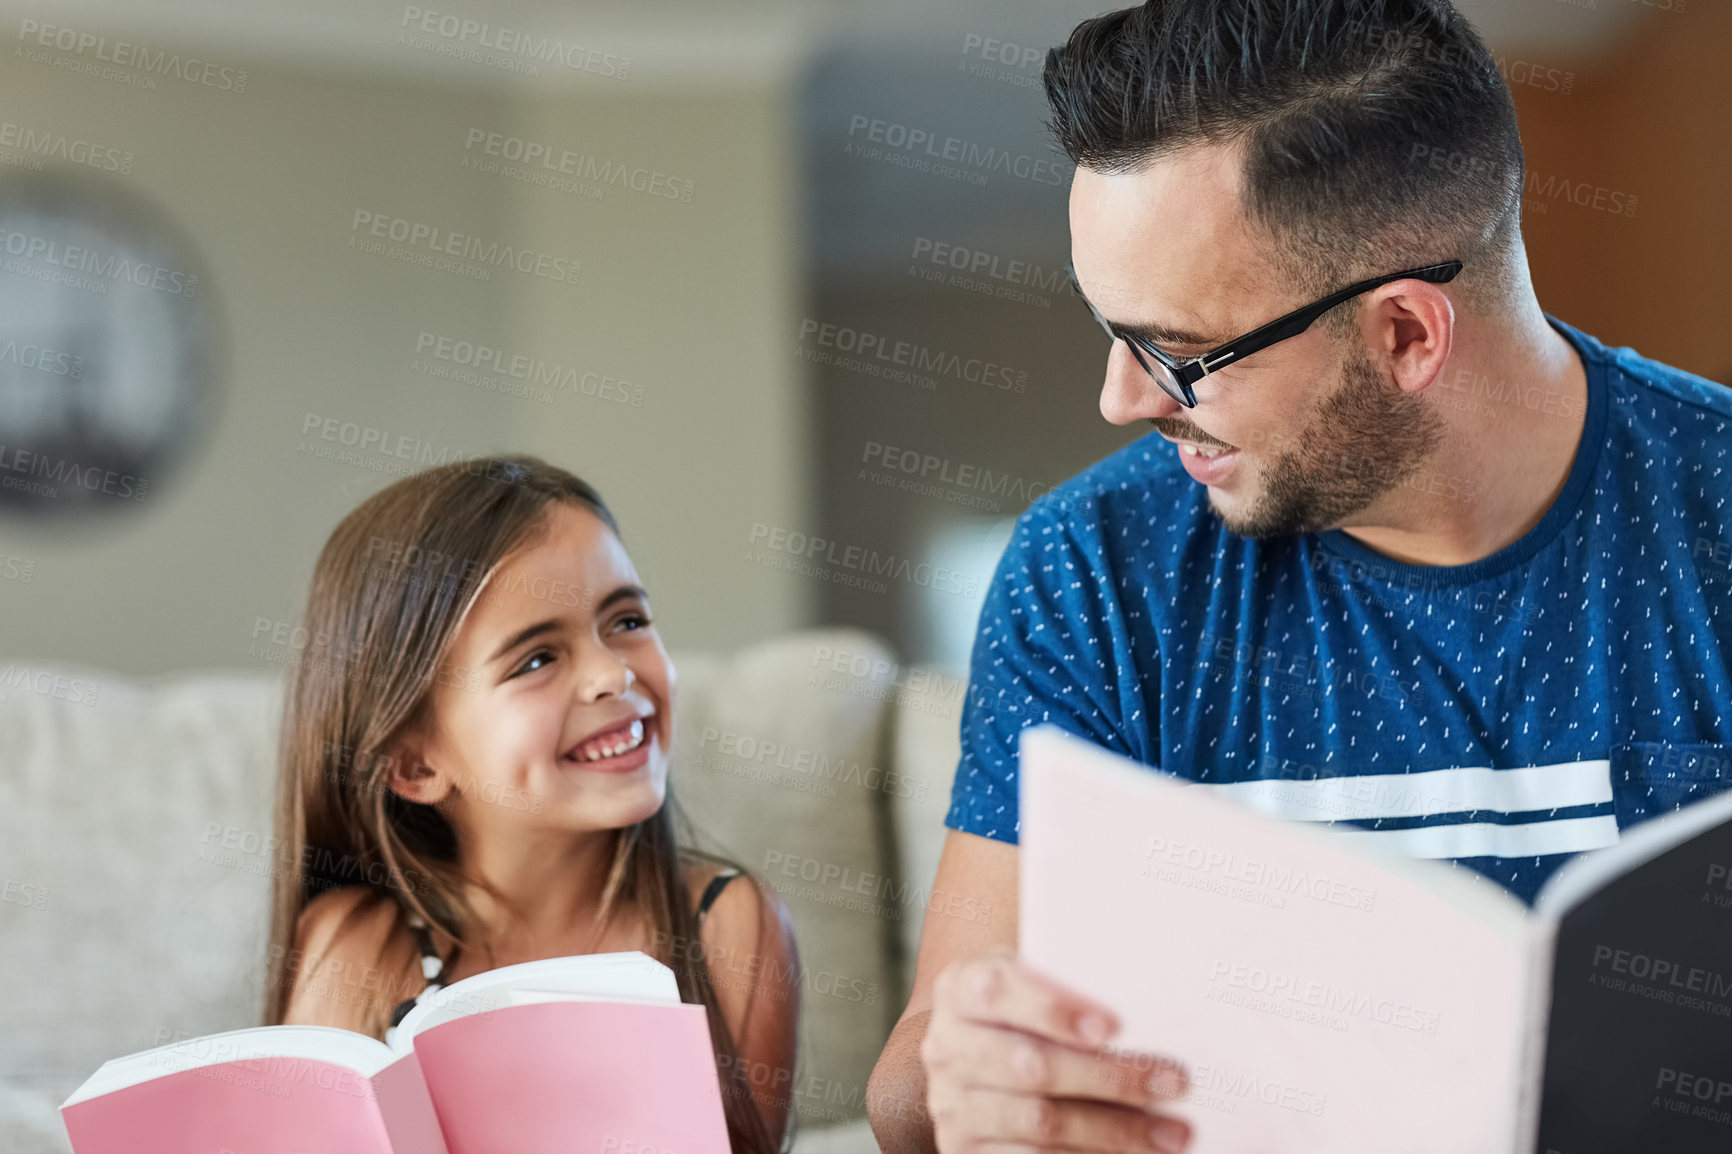 Buy stock photo Cropped shot of a father an daughter reading together at home